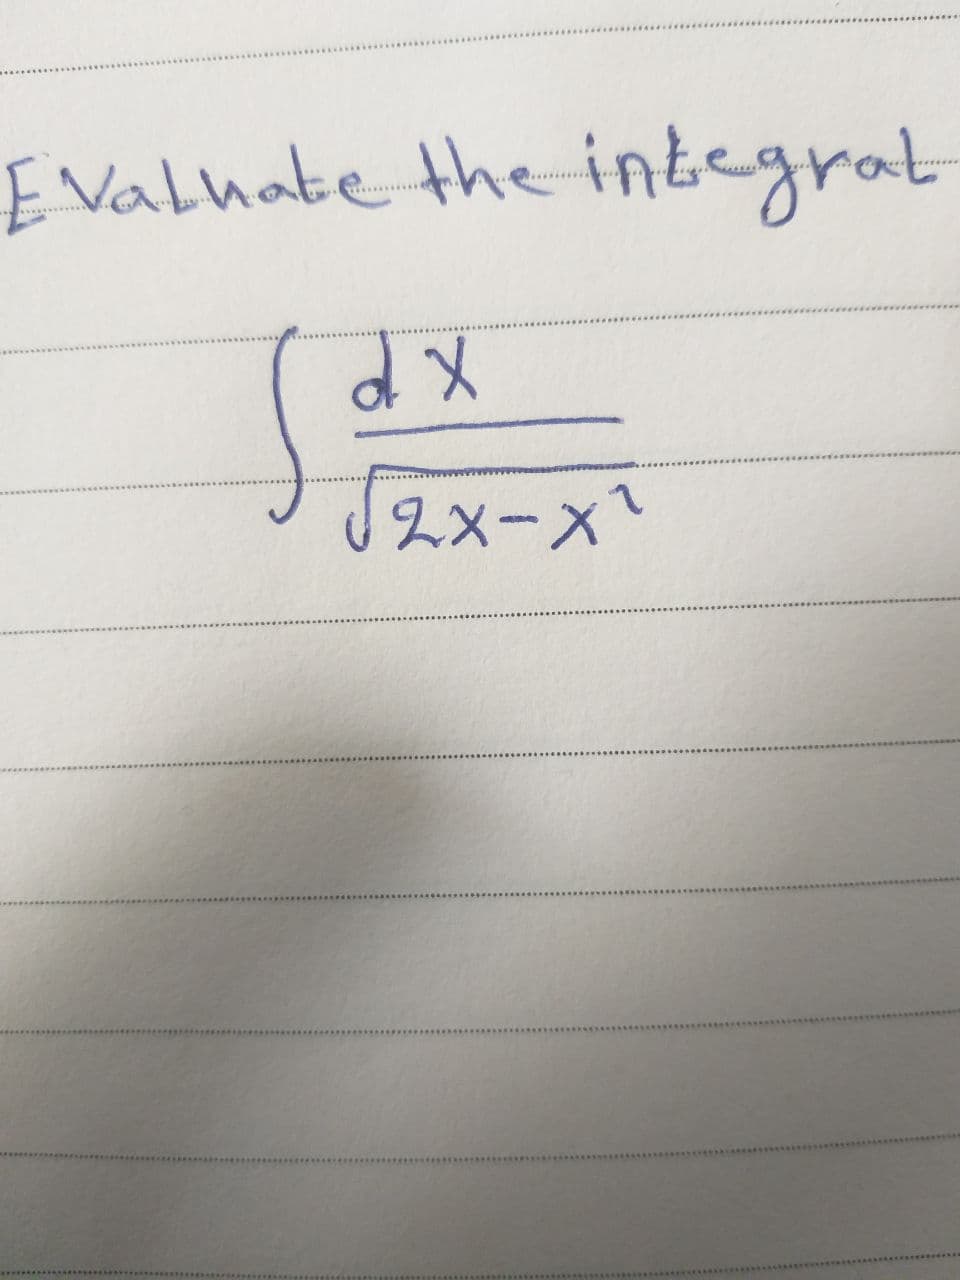 Evaluate the integral
fax
d x
√2x-x^